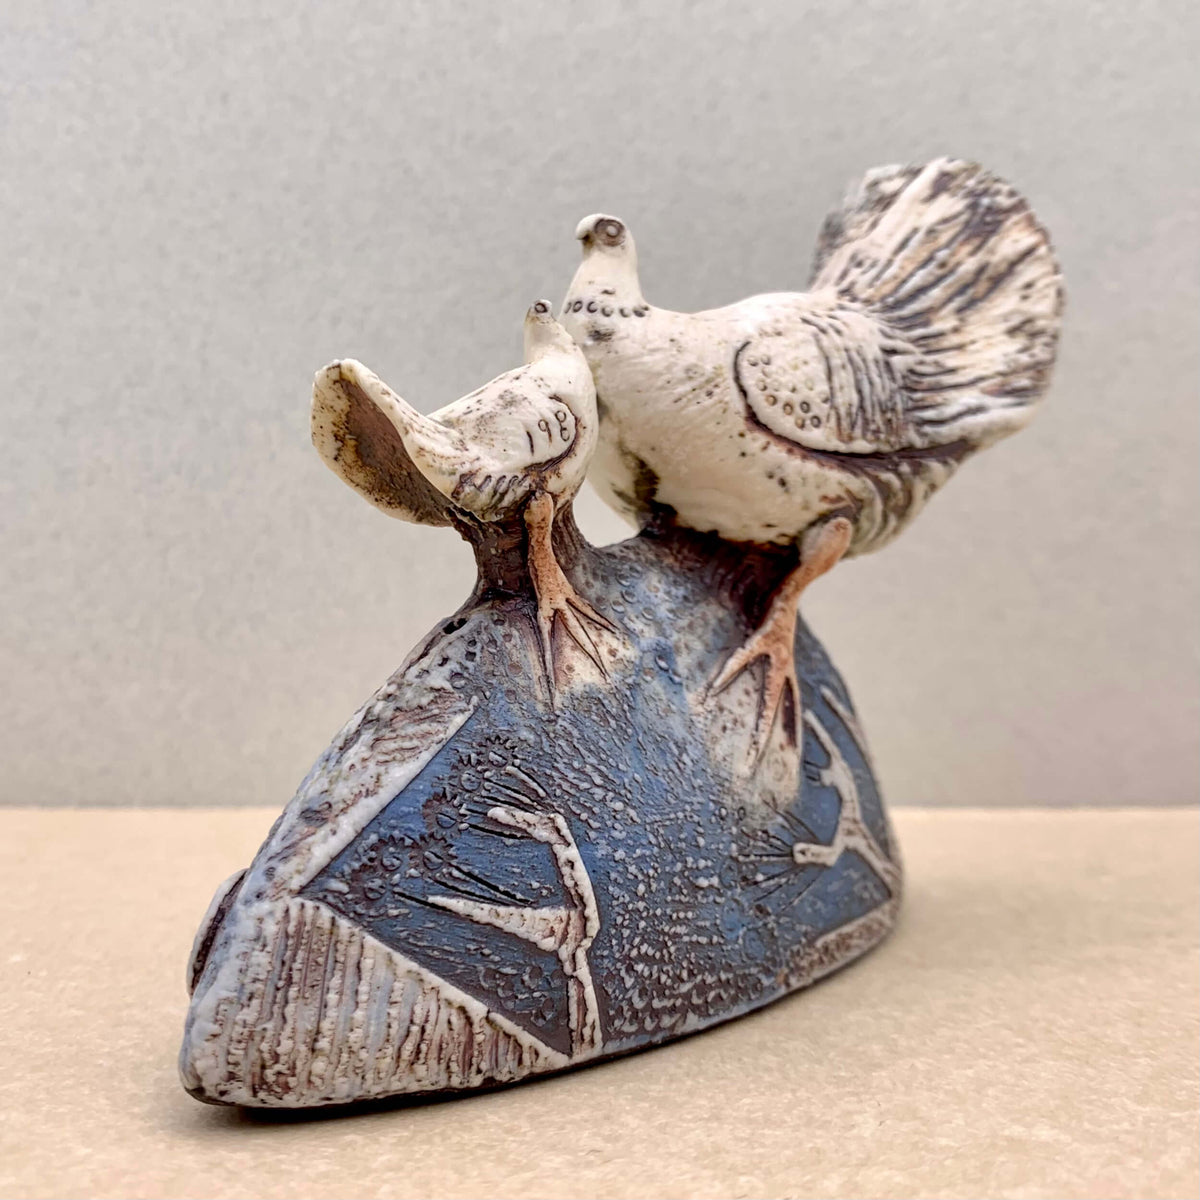 Blandine Anderson handcrafted porcelain sculpture of a smaller dove facing a larger dove. With colour contrasts of teal blue, subtle burgundy and porcelain and a rich texture on the base and dove wings. Available at Ferrers Gallery.